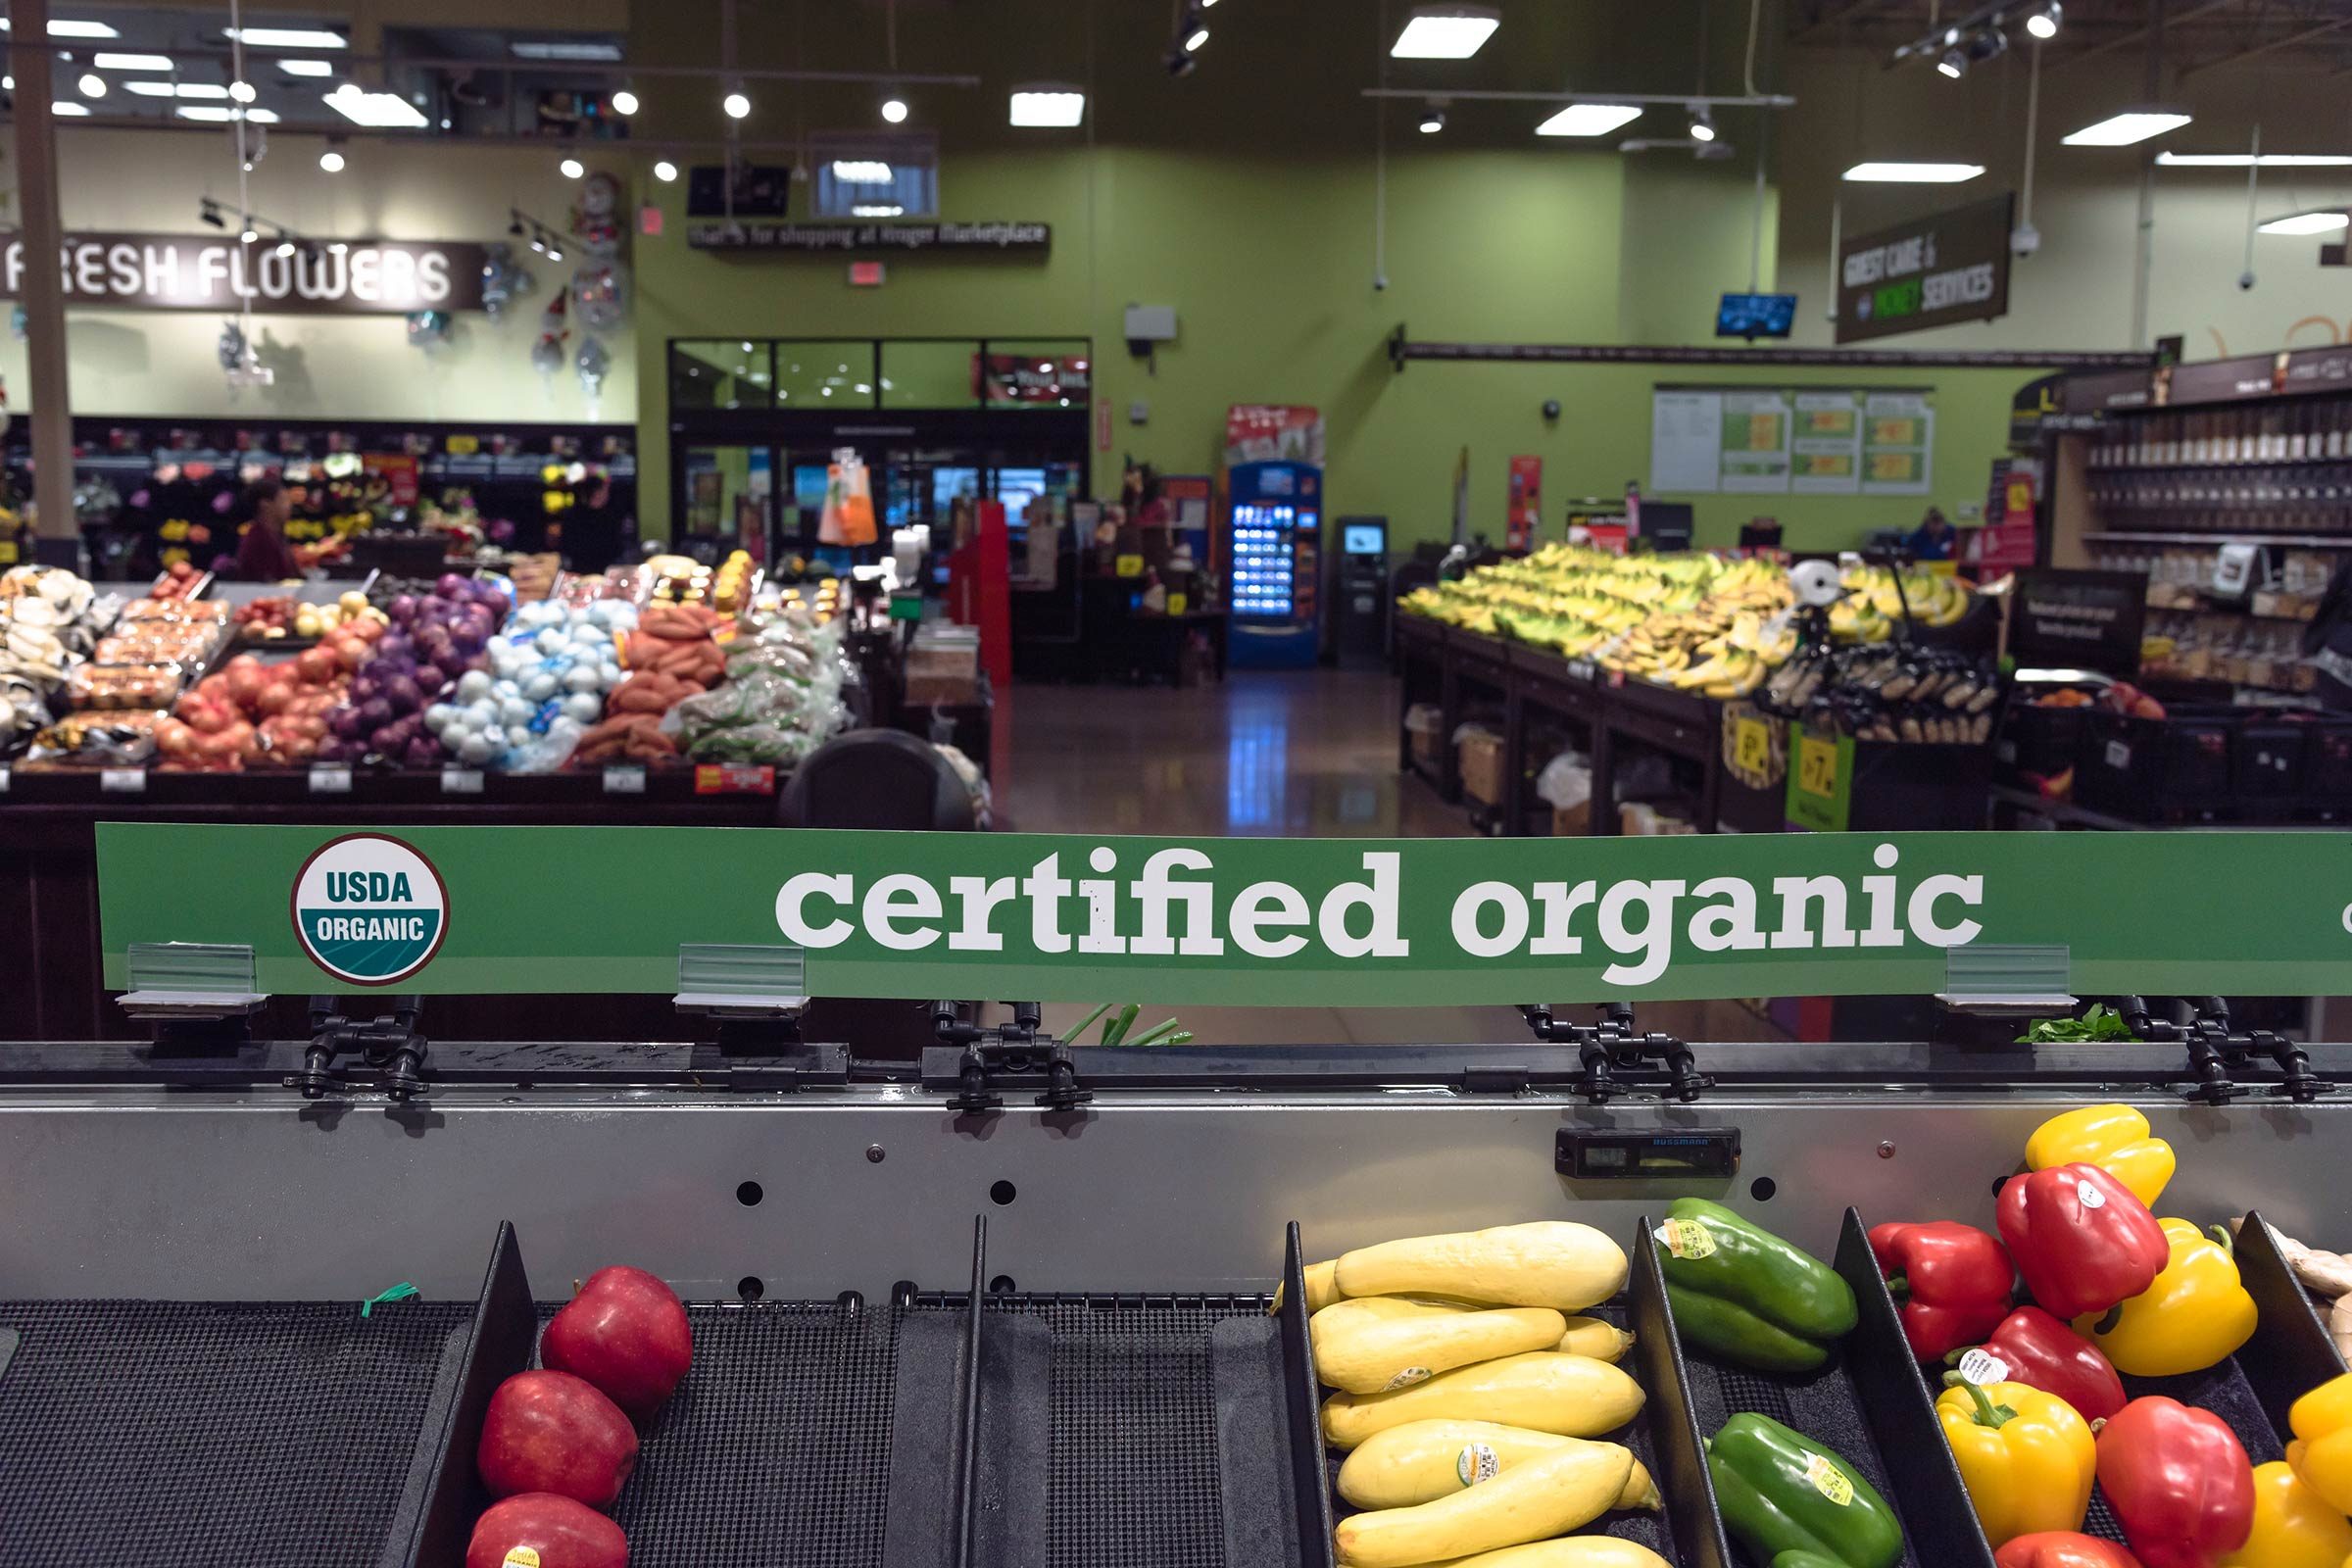 The Label We've All Been Waiting for on Genetically Modified Foods